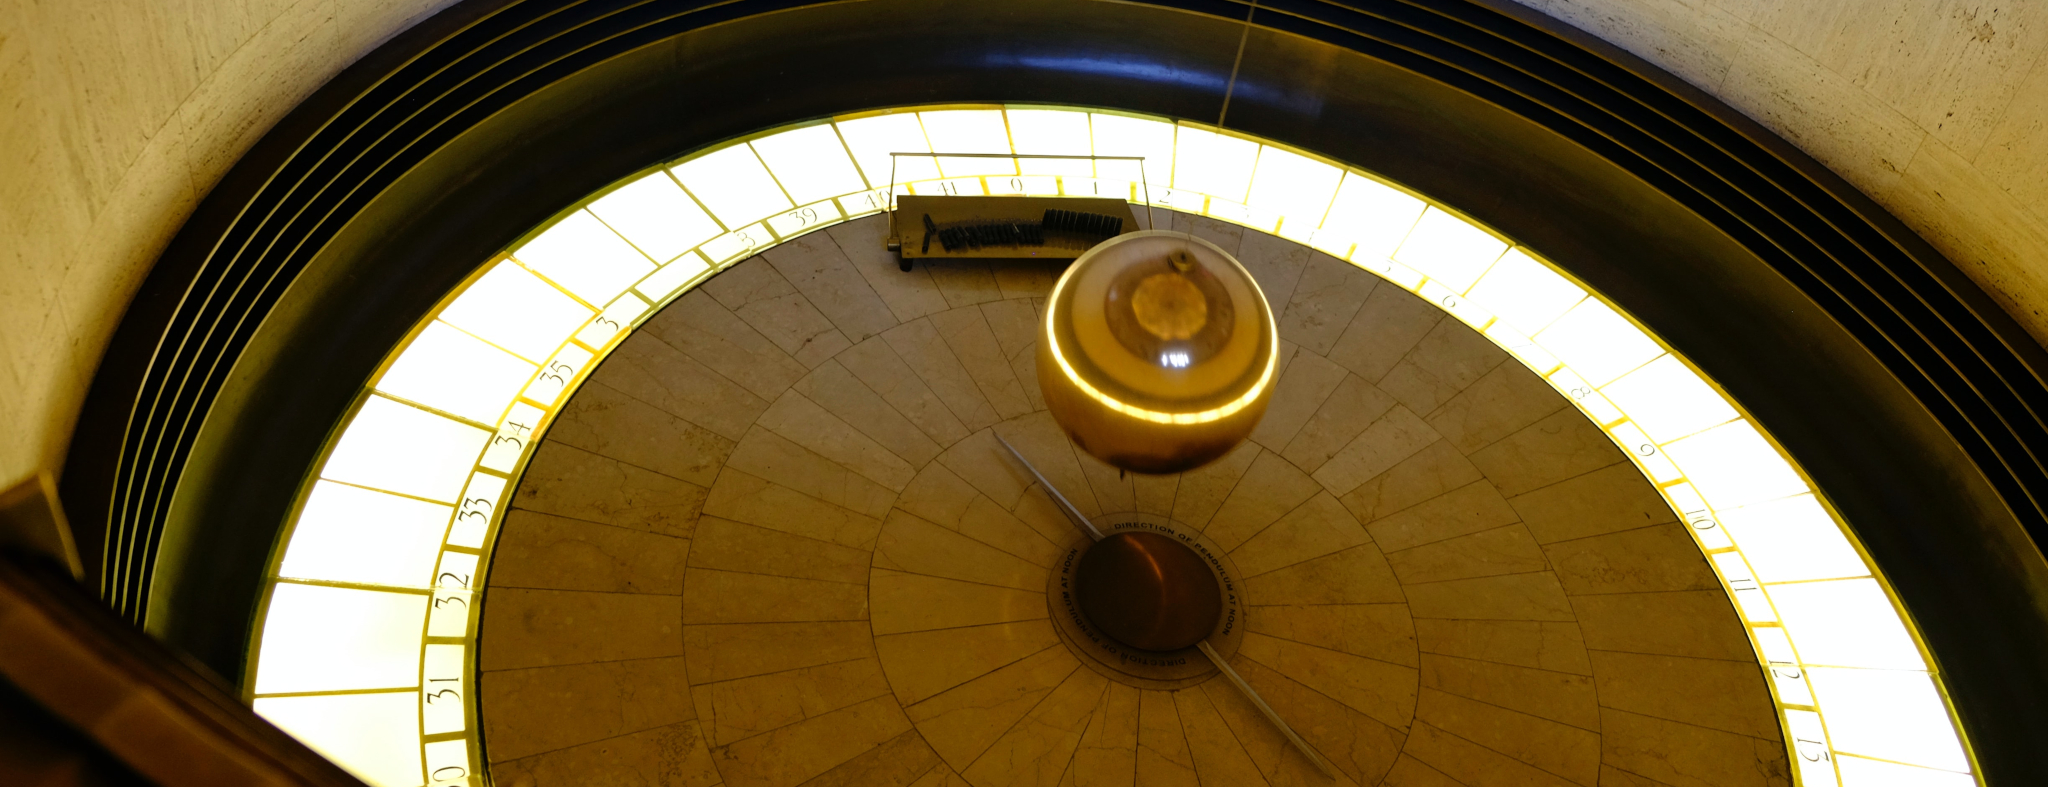 Picture of a pendulum in a circular pit, by Mike Von